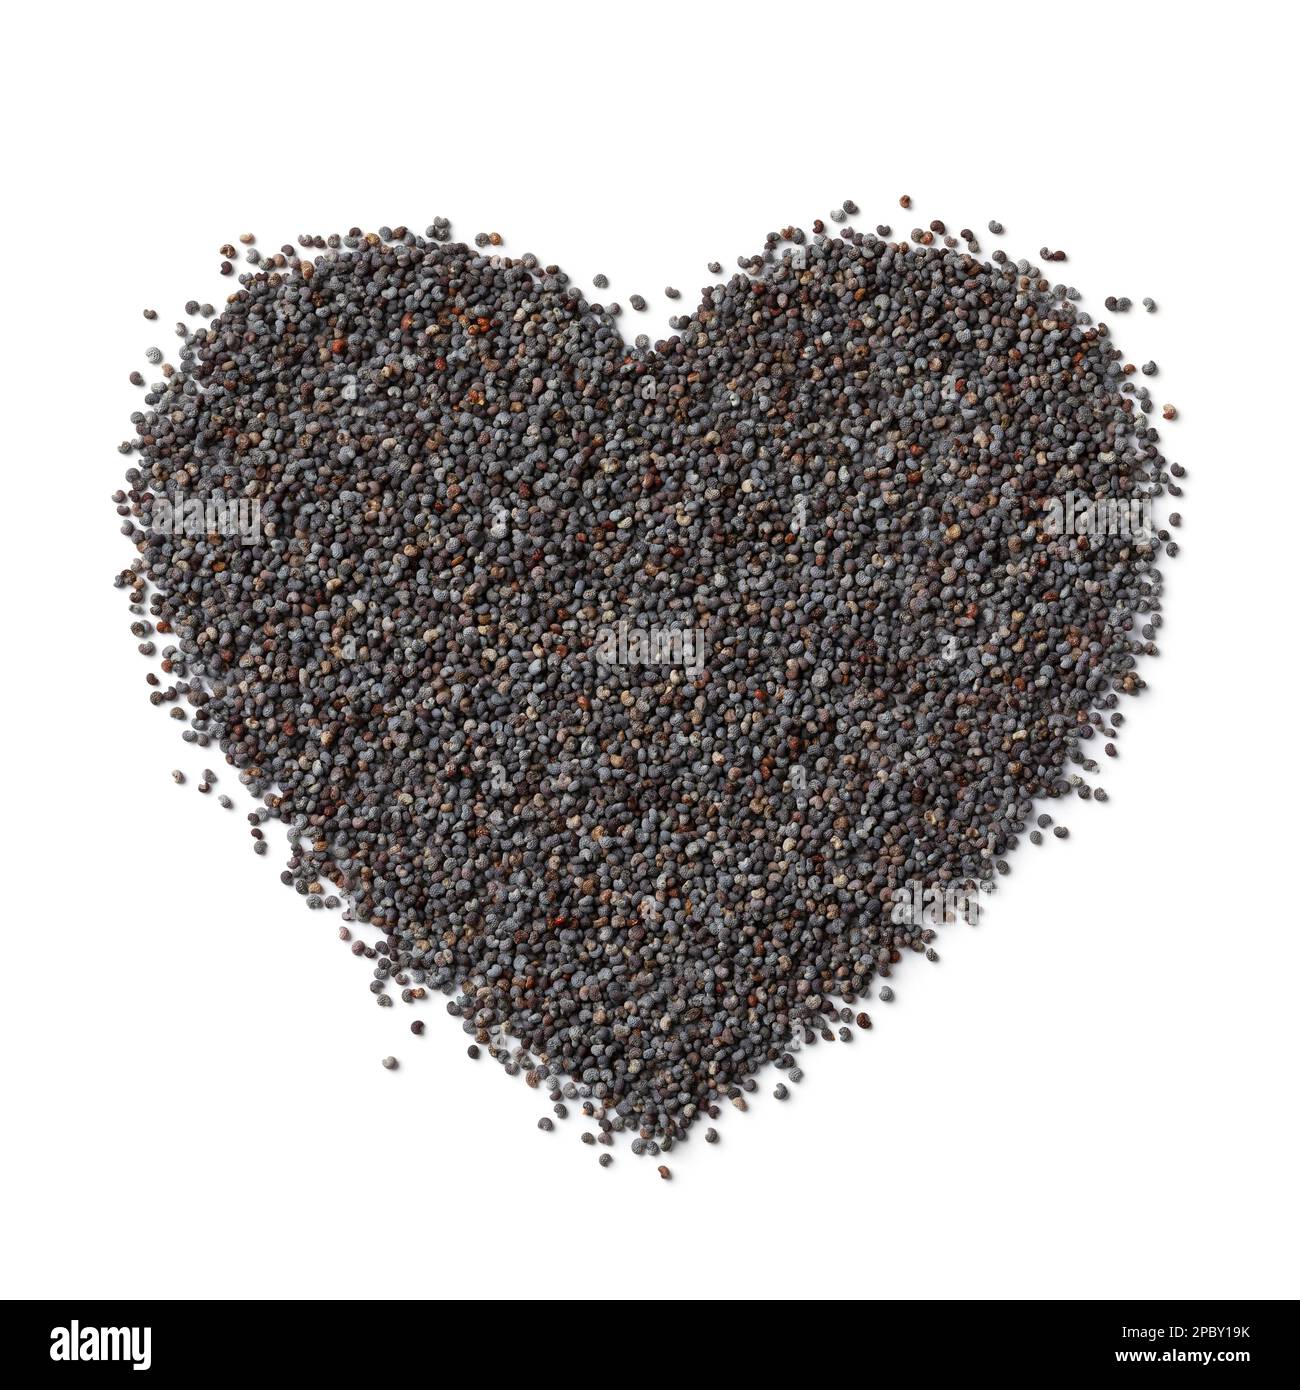 Black opium poppy seed in heart shape isolated on white background Stock Photo